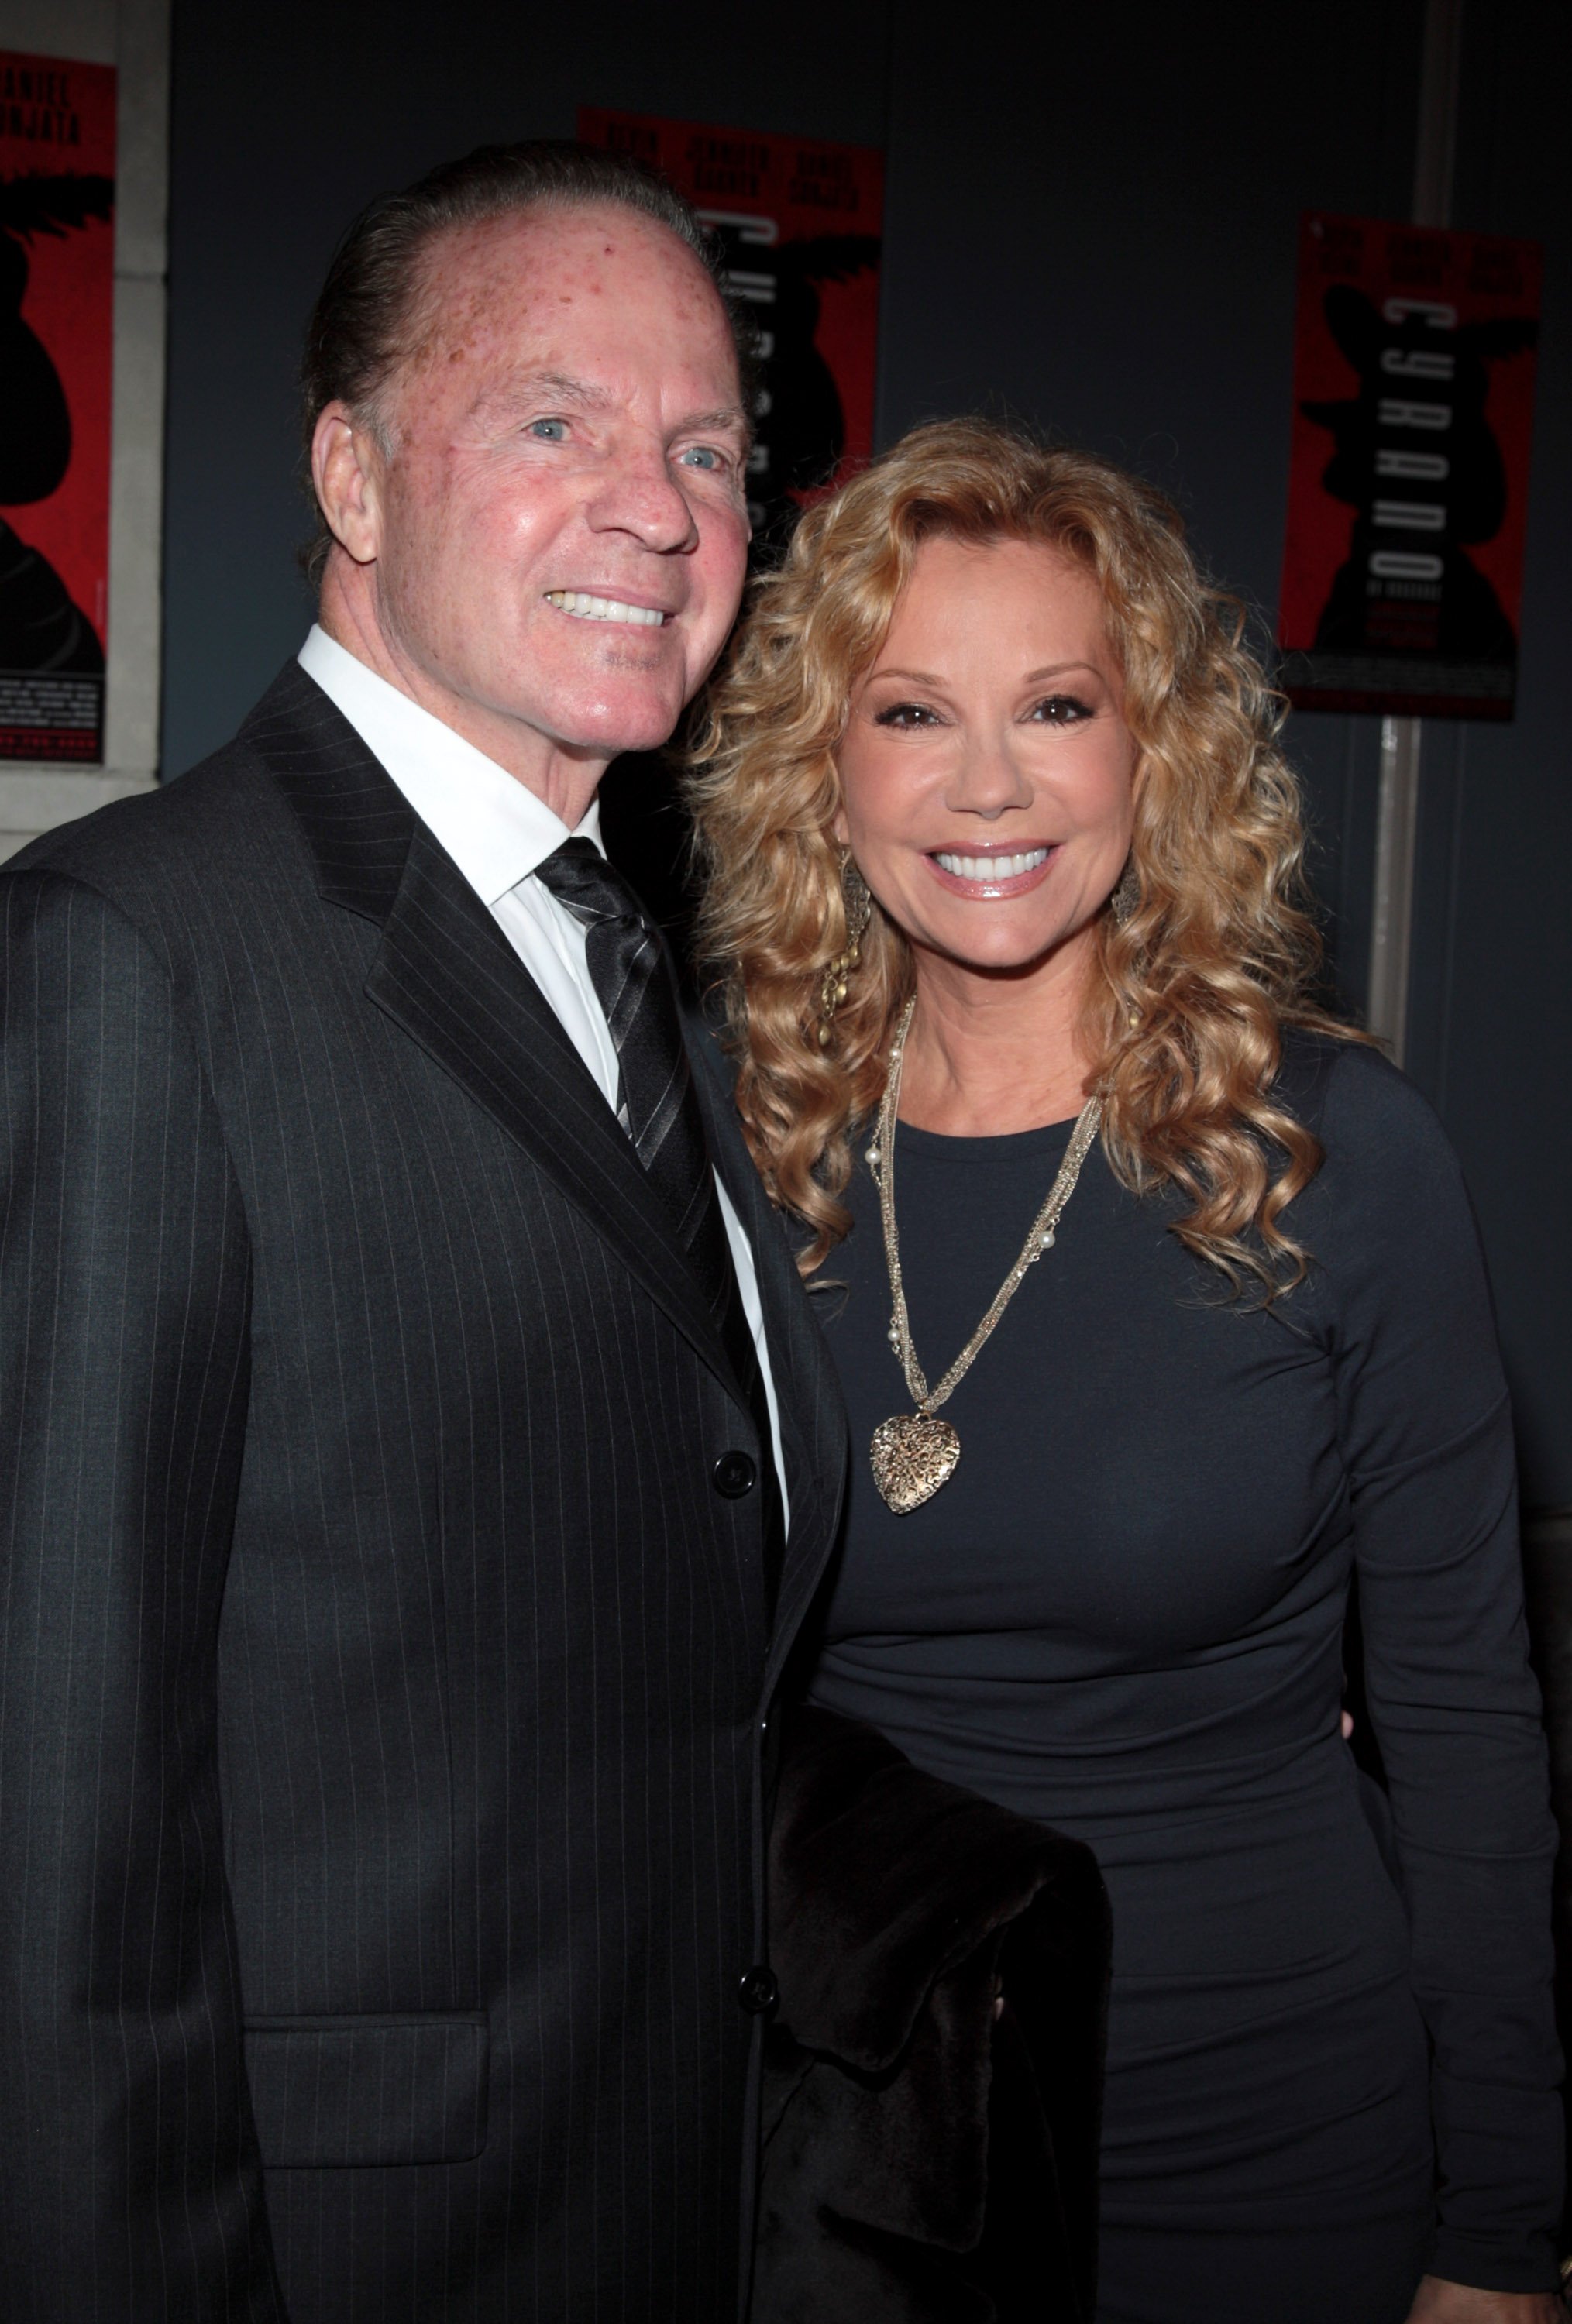 Kathie Lee Gifford and Frank Gifford, at the opening night of "Cyrano De Bergerac" at the Richard Rodgers Theatre November 1, 2007  | Photo: GettyImages